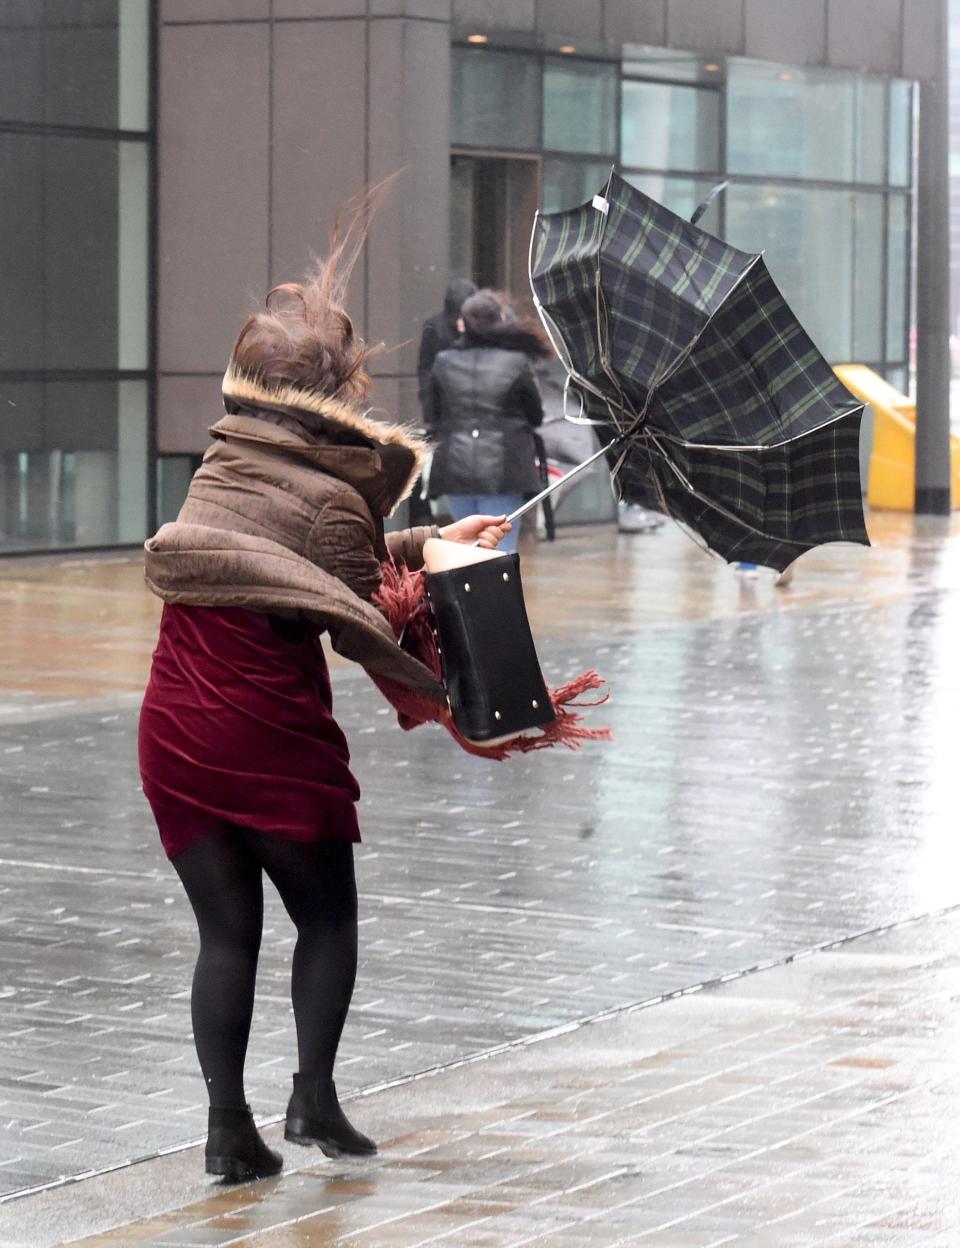 Storm Doris: Travel chaos as commuters warned not to travel from several major stations as 'weather bomb' batters Britain